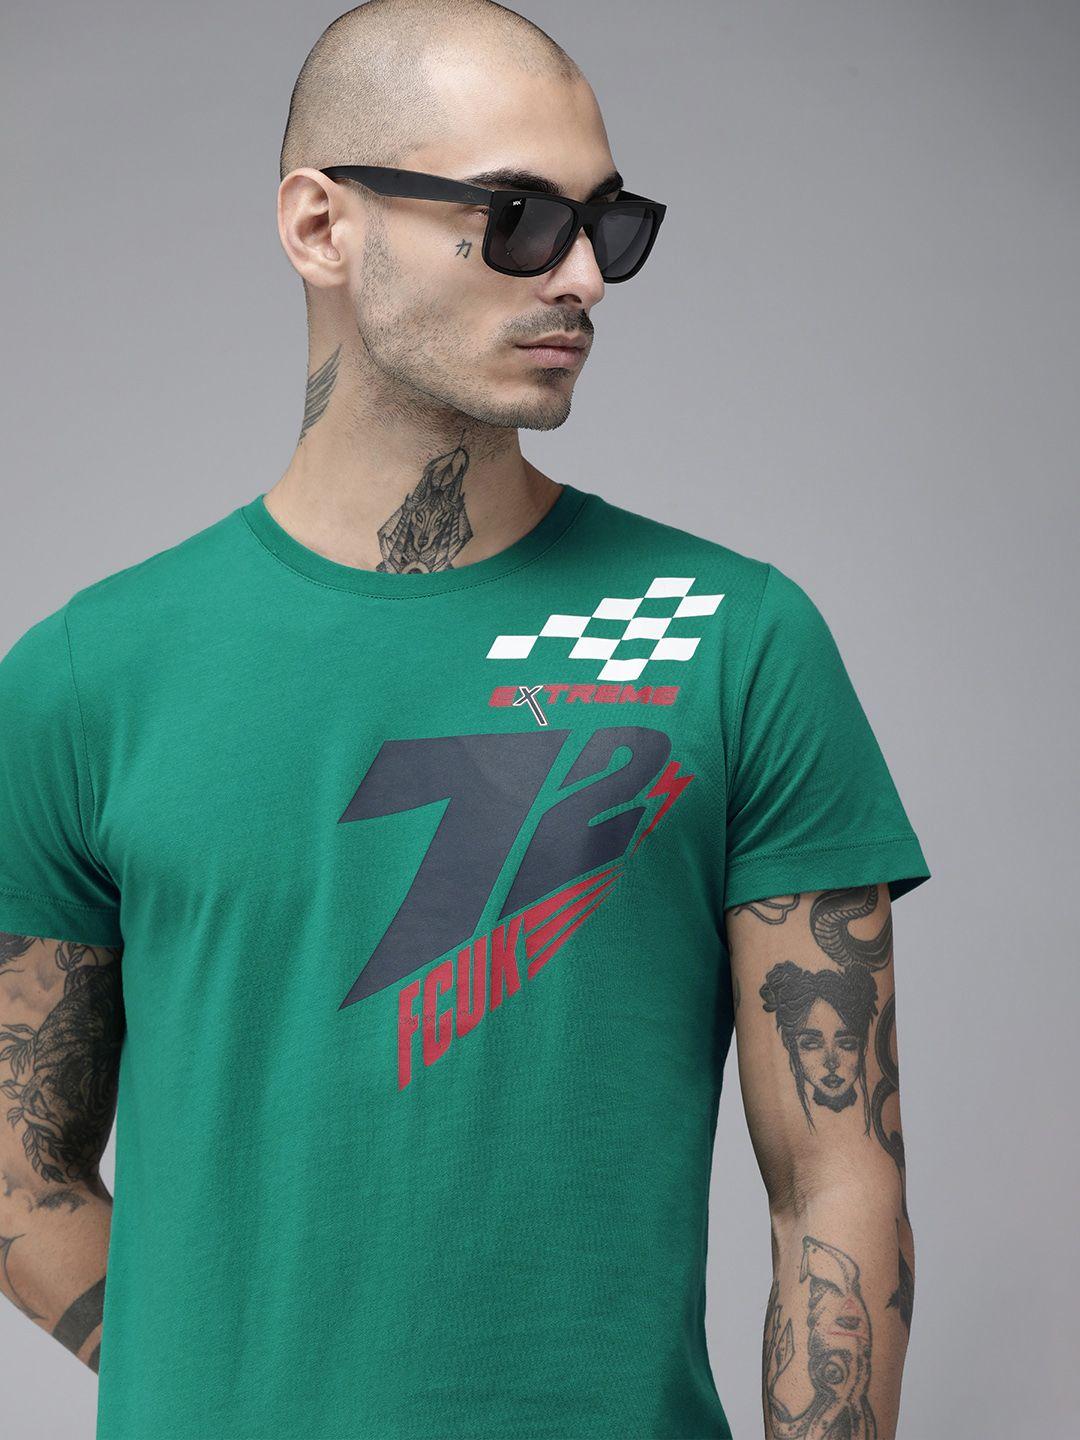 french connection men teal green brand logo printed pure cotton t-shirt